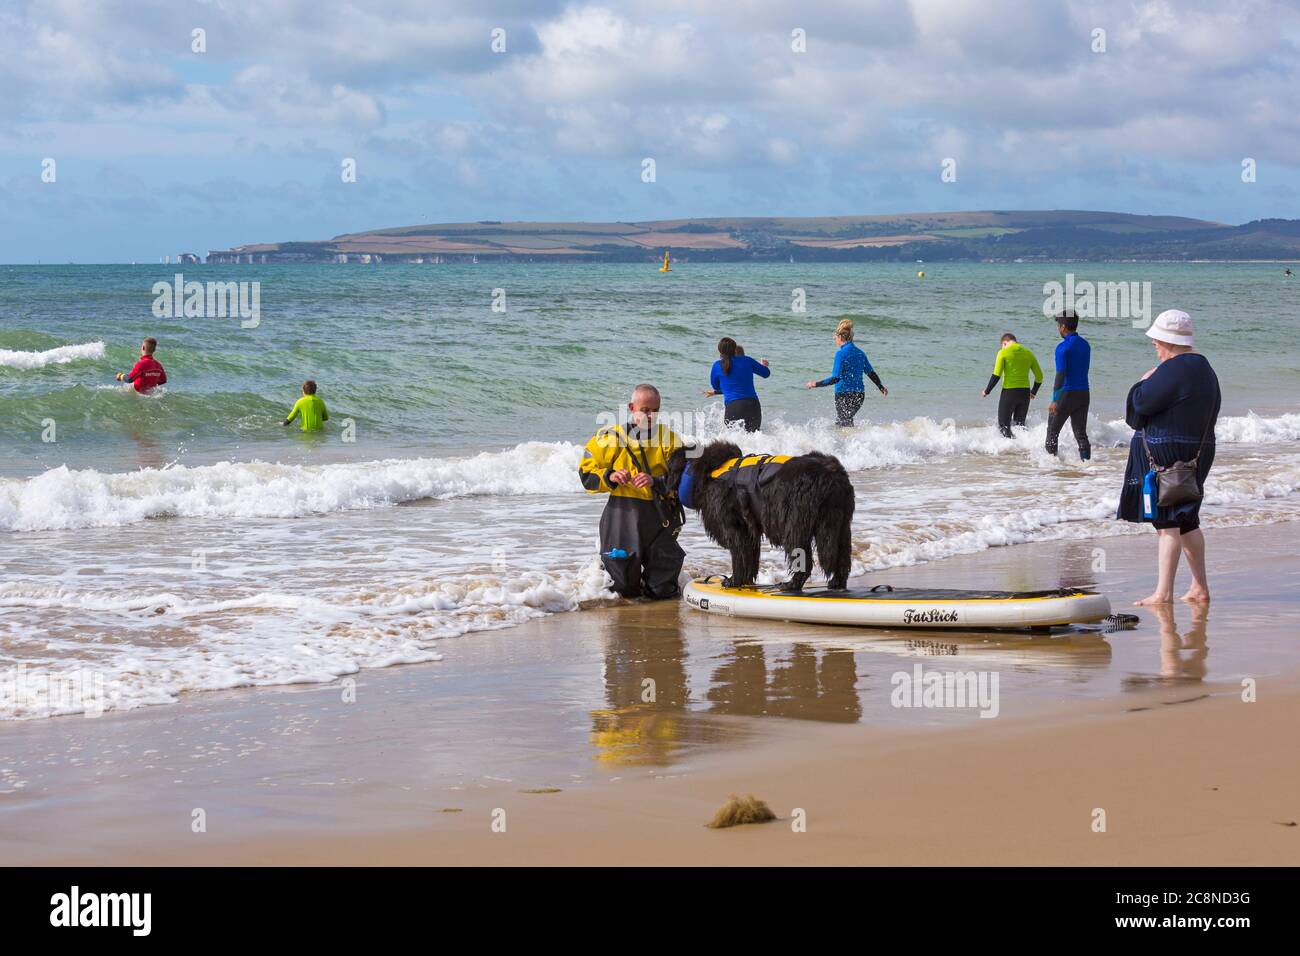 Poole, Dorset UK. 26th July 2020. UK weather: very windy, but warm and sunny with rough waves at Poole beaches. Dogs and their owners have fun in the sea. Dog training - Newfoundland dog learning to paddleboard paddle board. Credit: Carolyn Jenkins/Alamy Live News Stock Photo